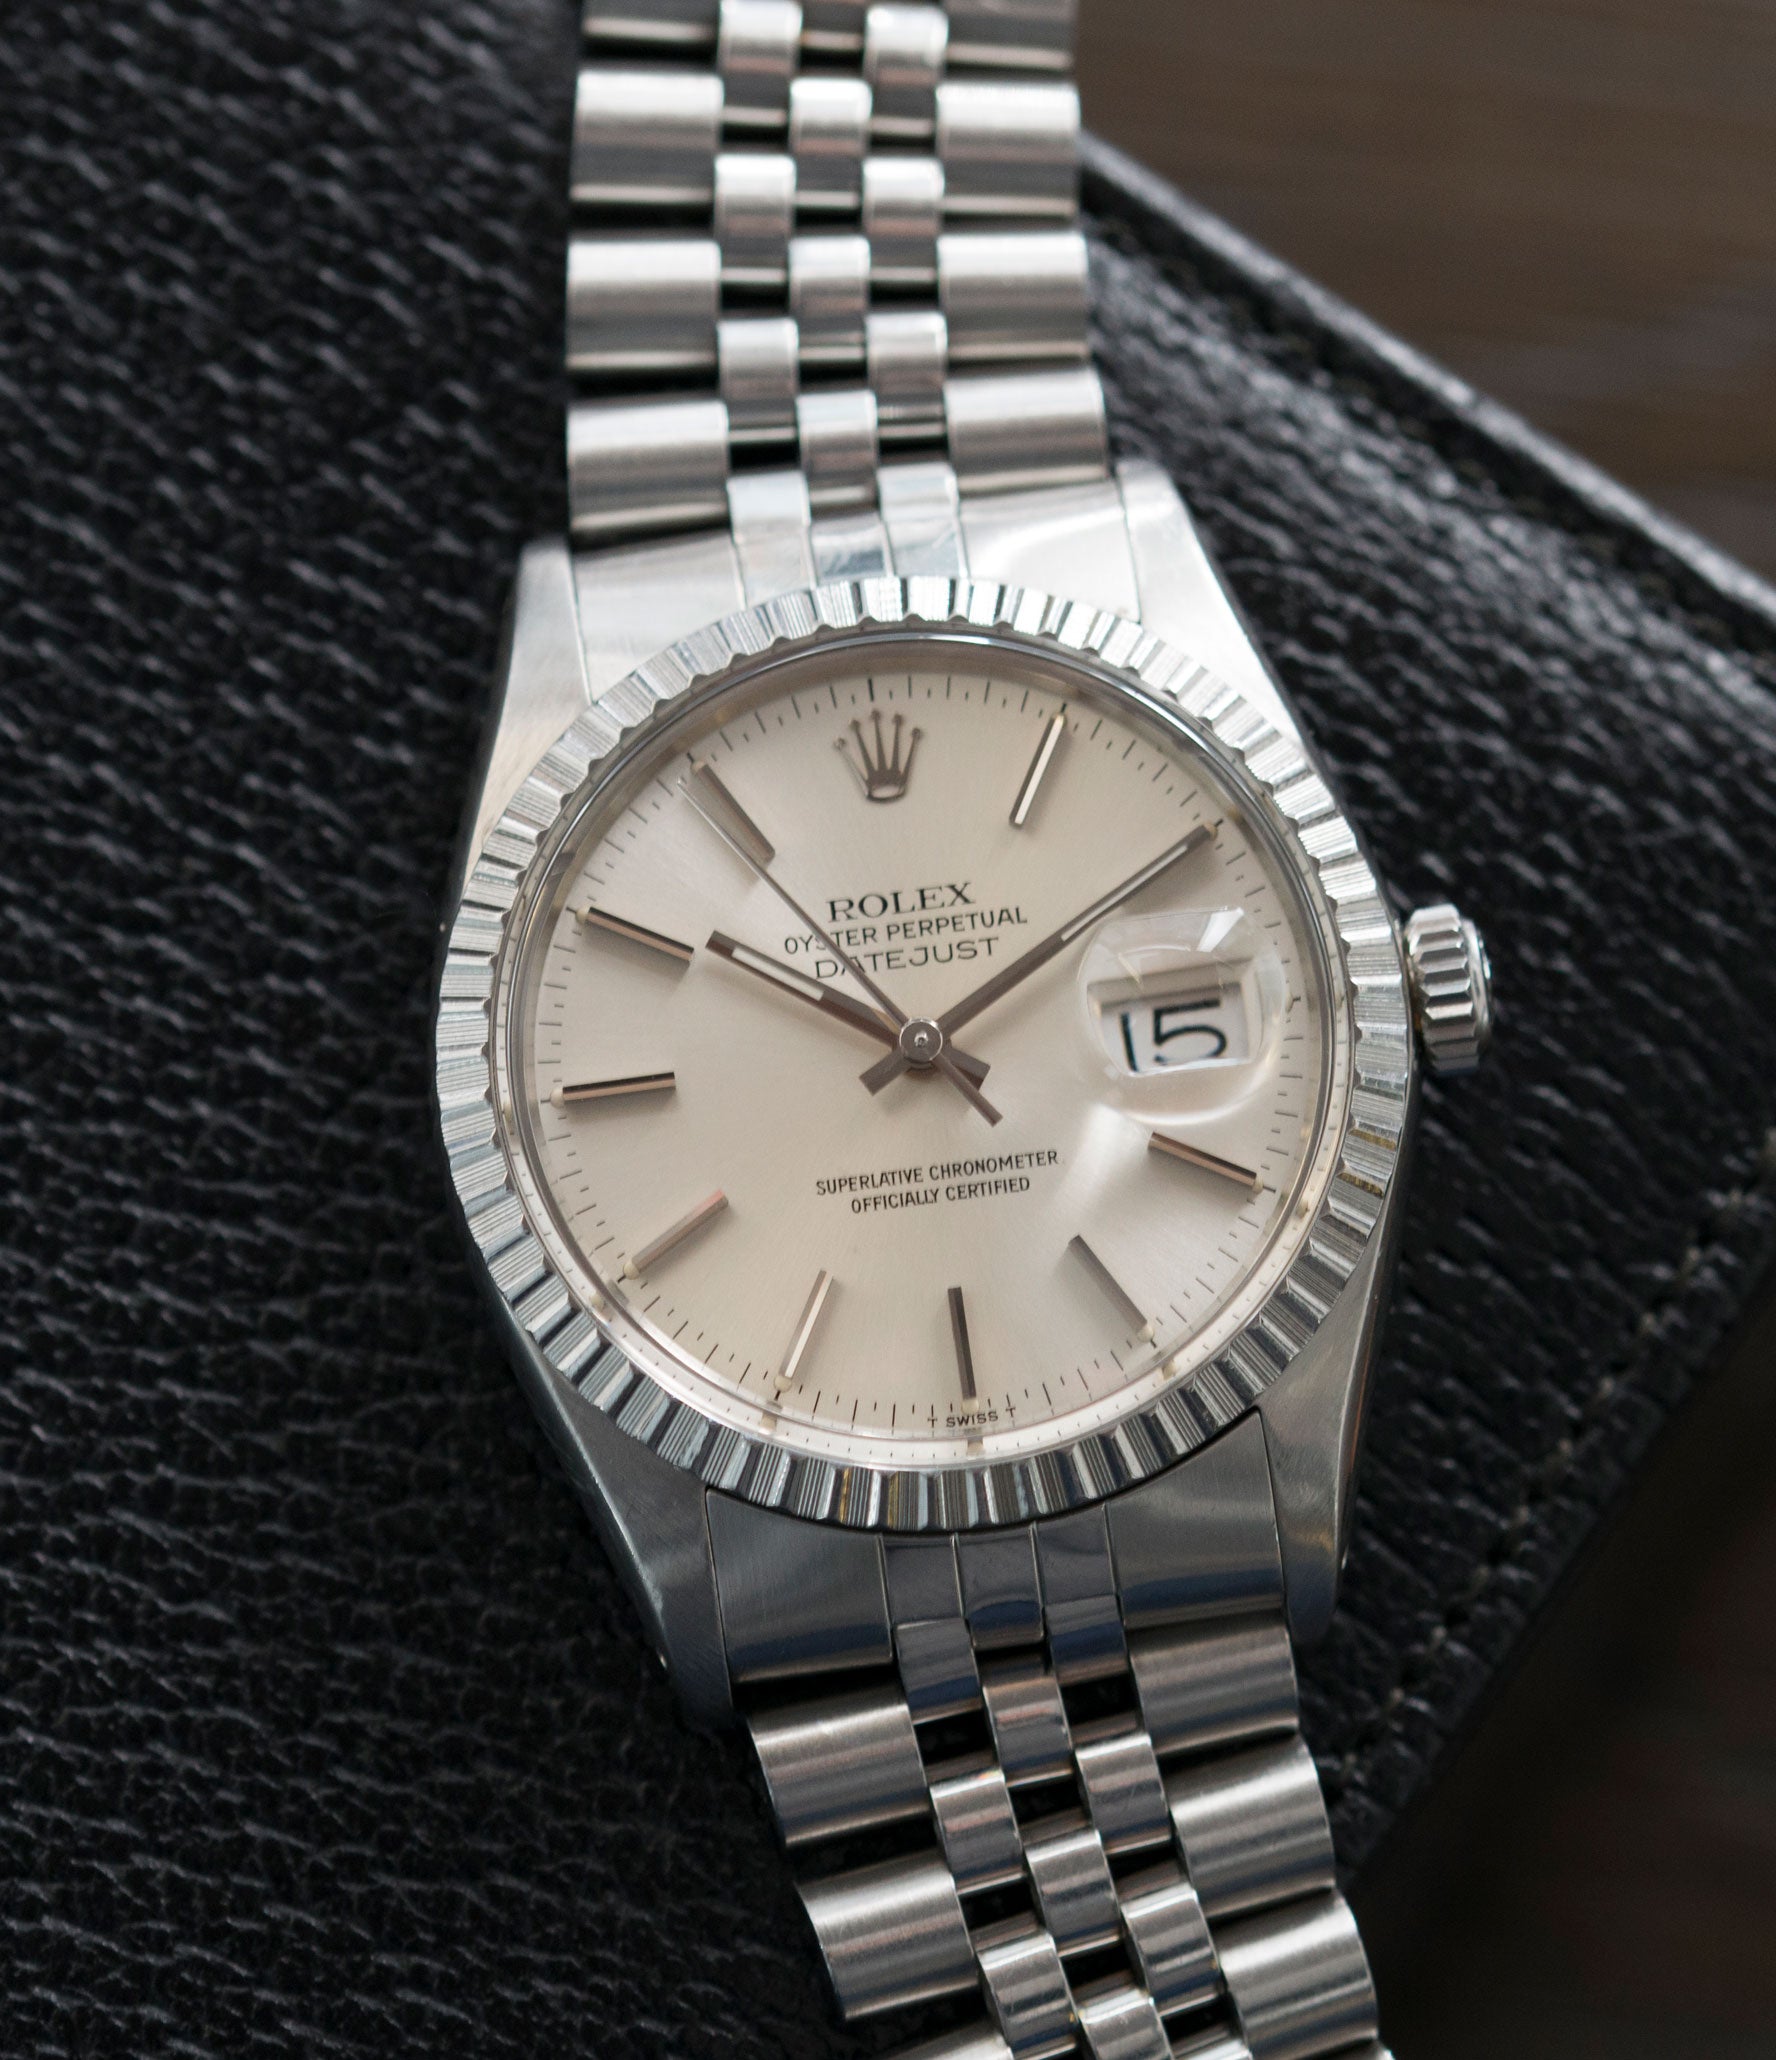 vintage oyster perpetual datejust